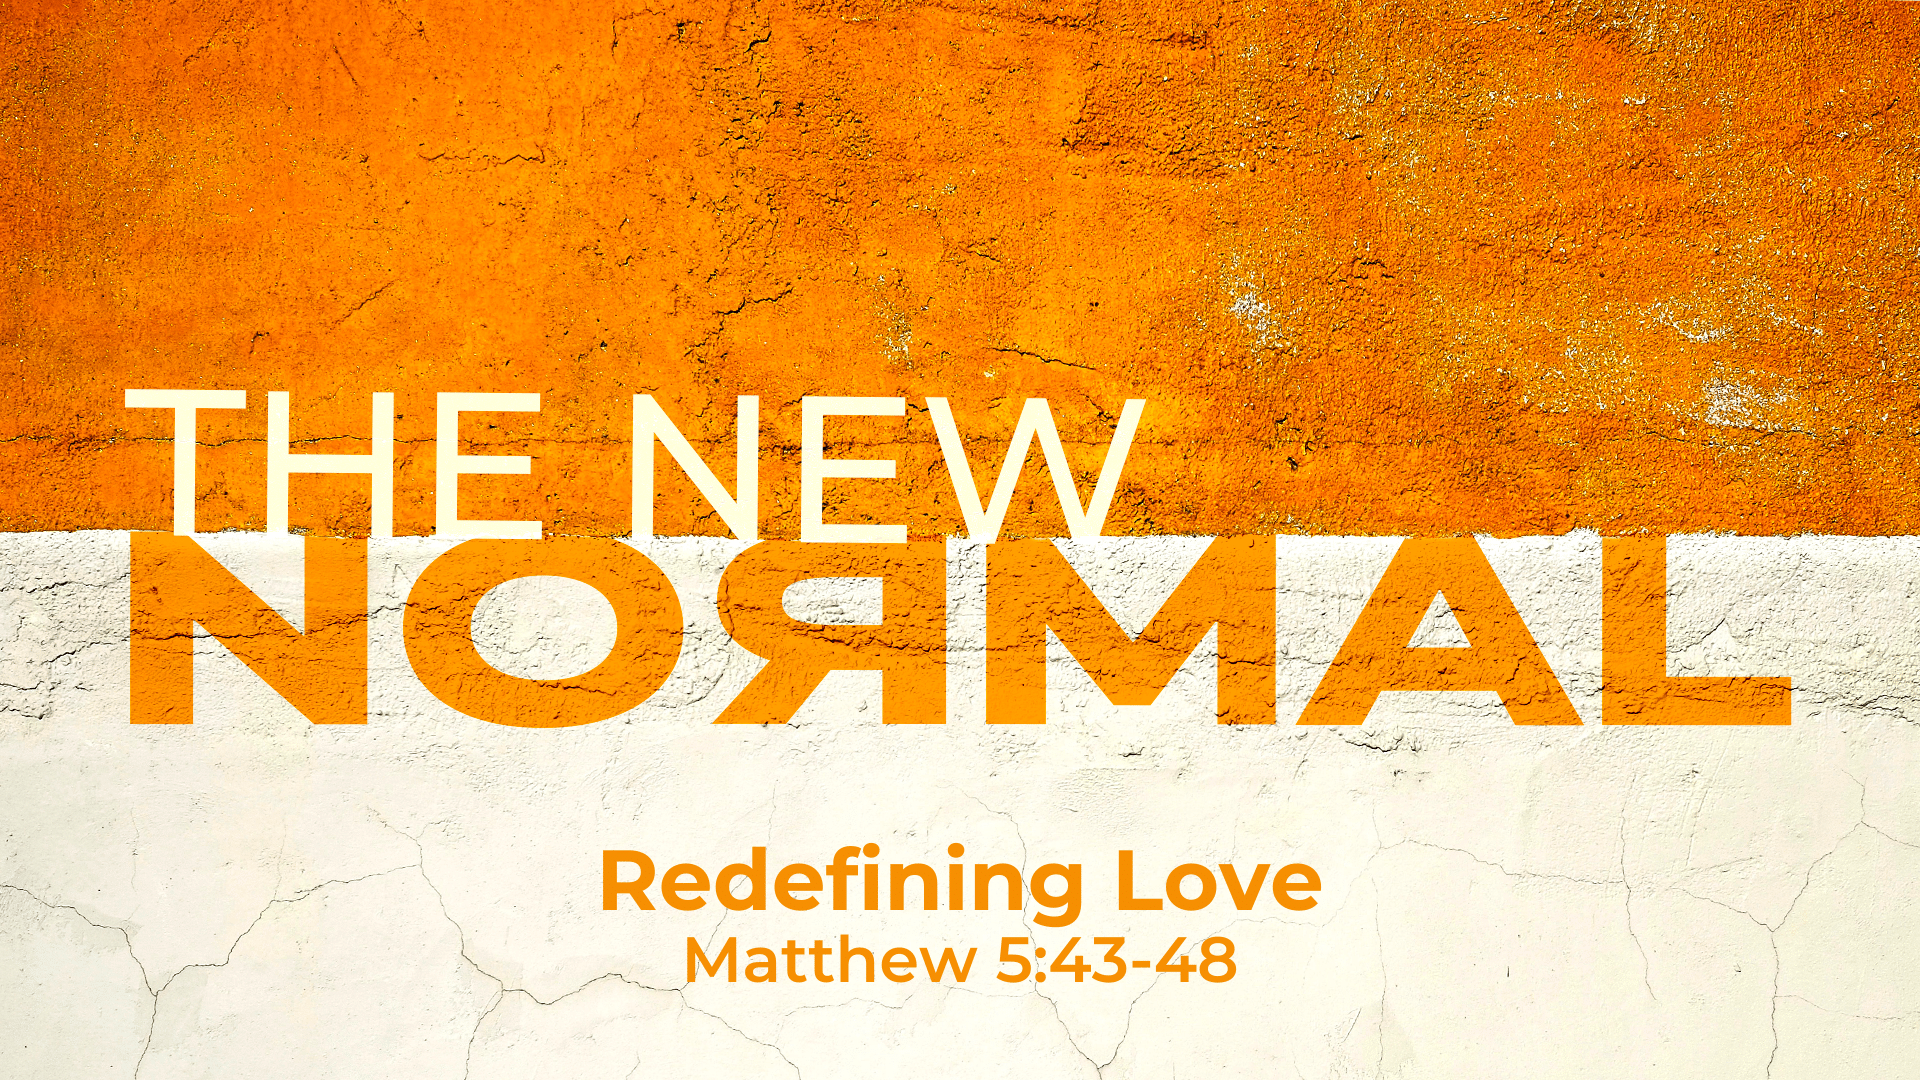 The New Normal: Redefining Love